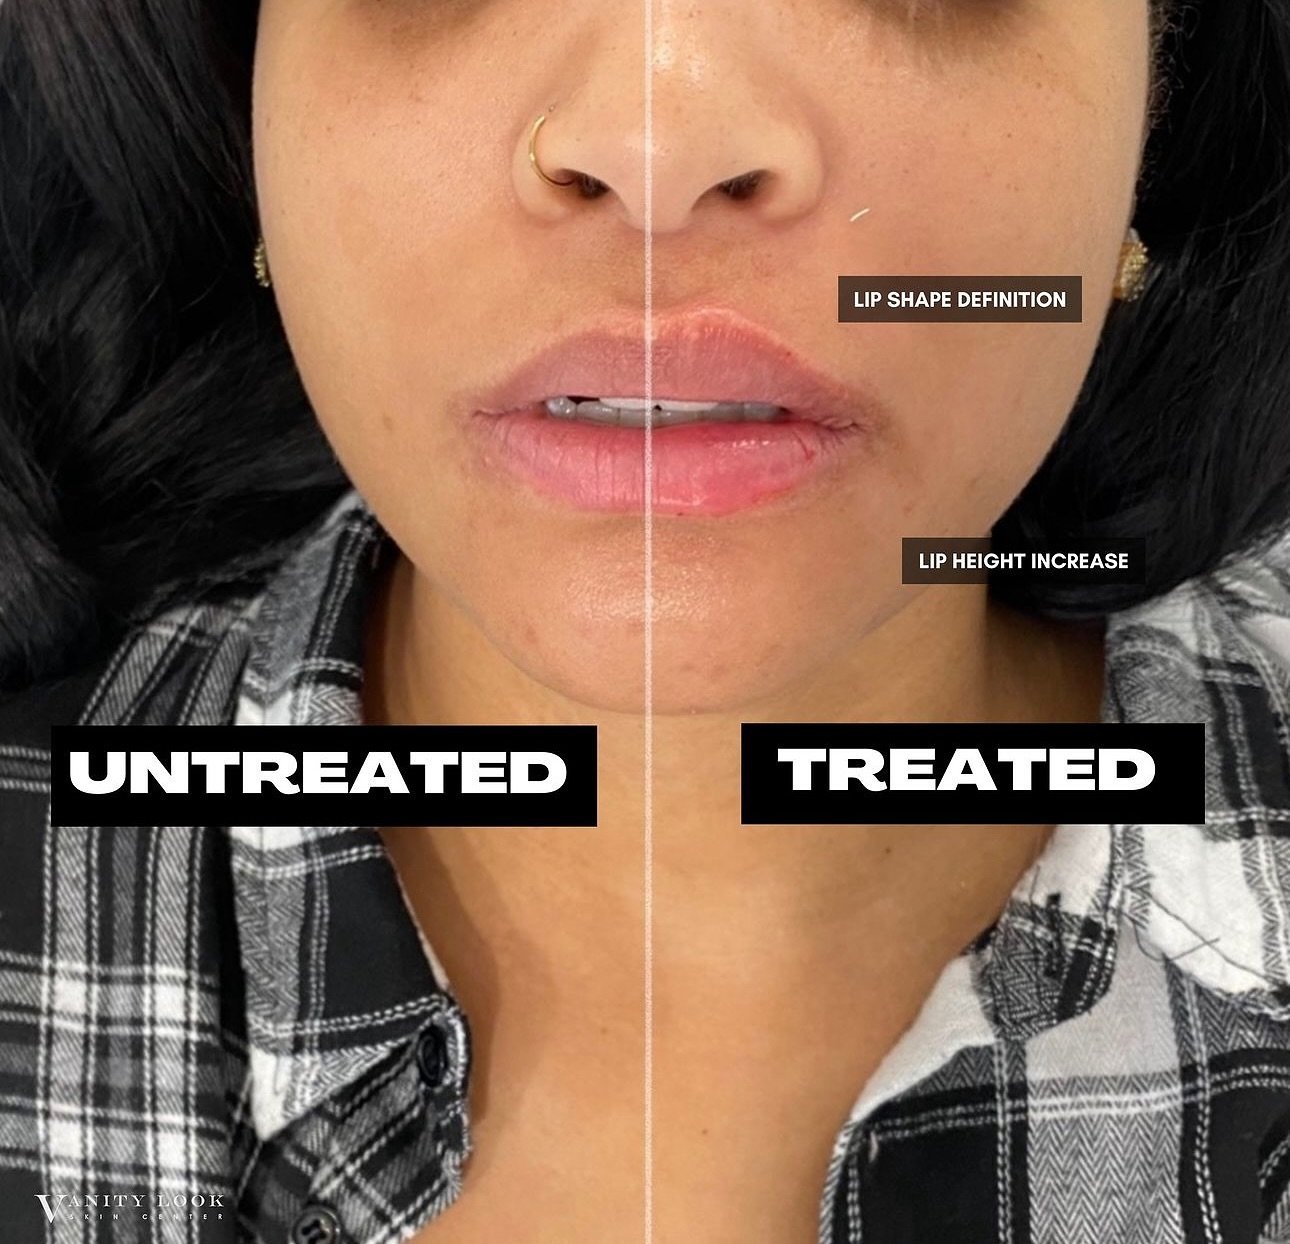 Can lip filler really make a difference? Here&rsquo;s a side-by-side comparison of treated vs. untreated lips 💉👄

Services we offer:
▪️ Fillers 
▪️ Anti-aging treatments
▪️ Facial Balancing
▪️ Laser Hair Removal
▪️ Skin Rejuvenation
▪️ Morpheus8 fo